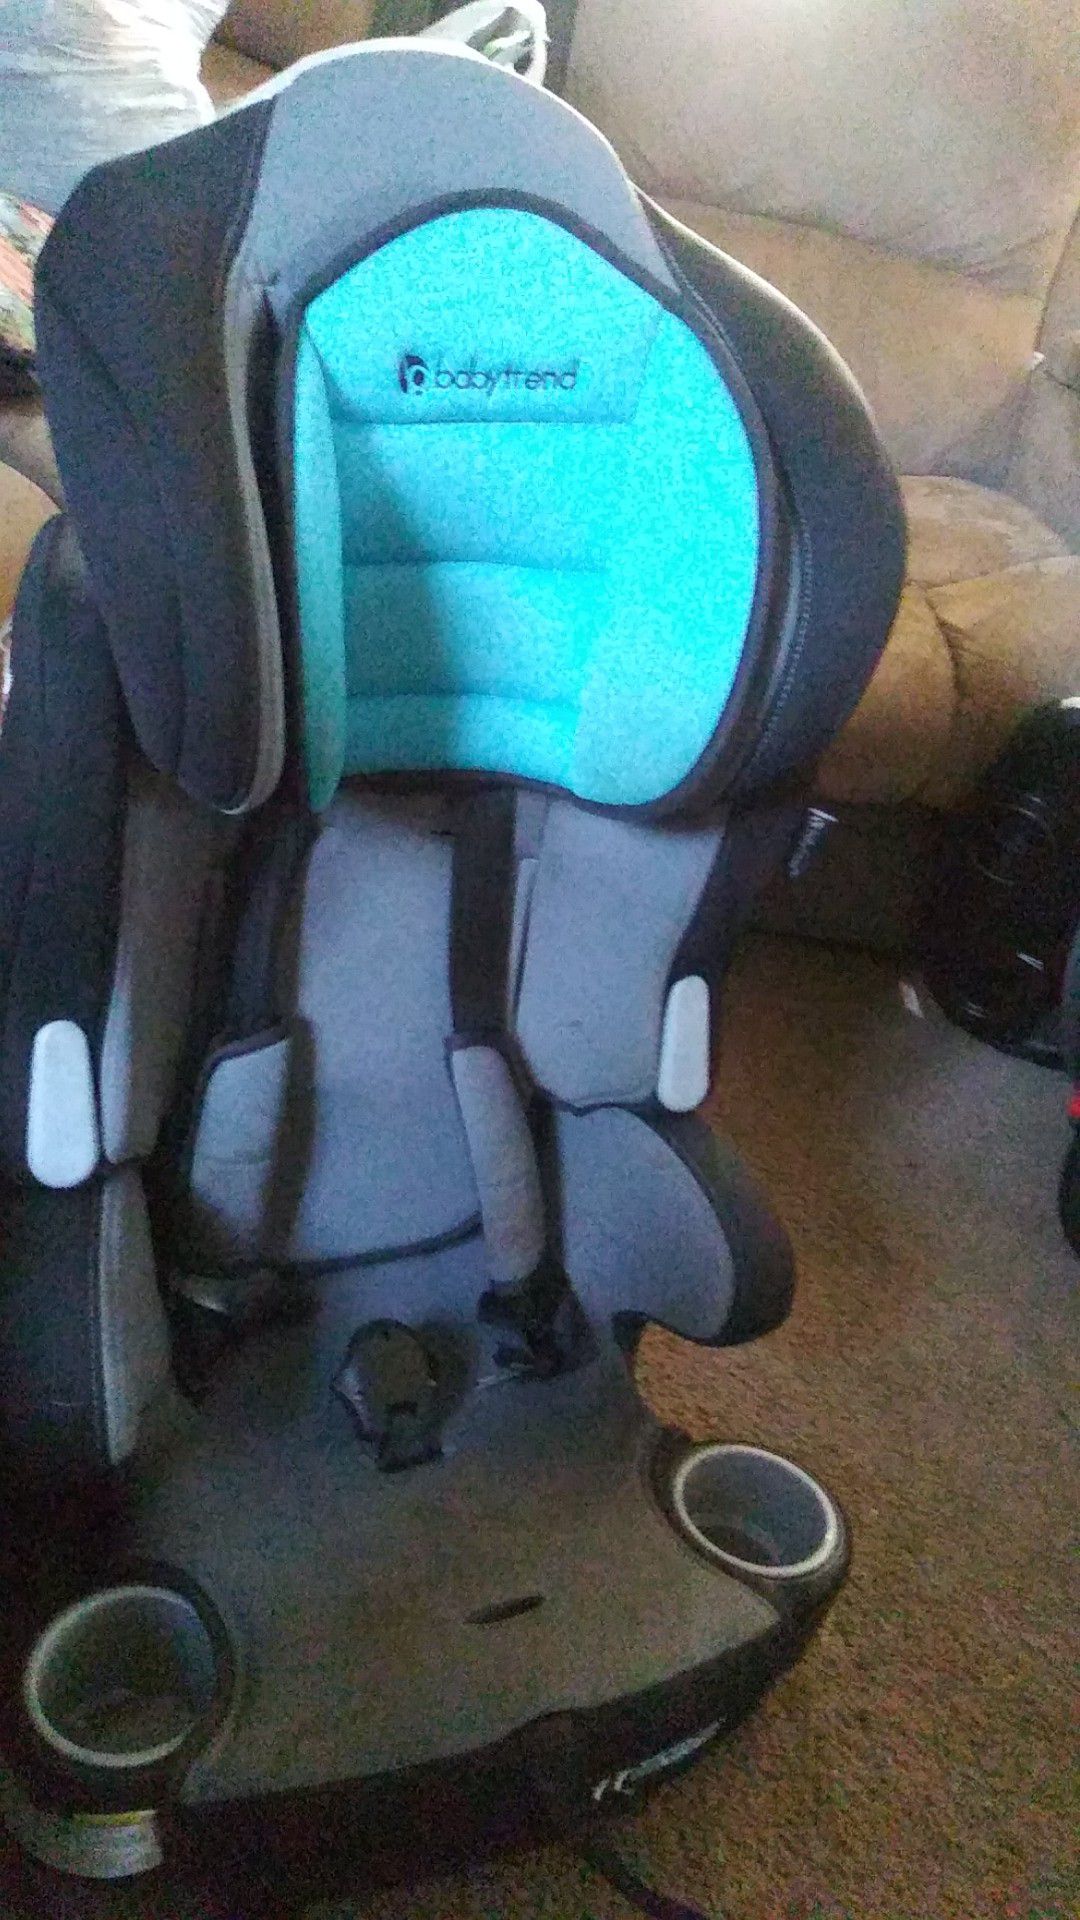 Babytrend back booster carseat.